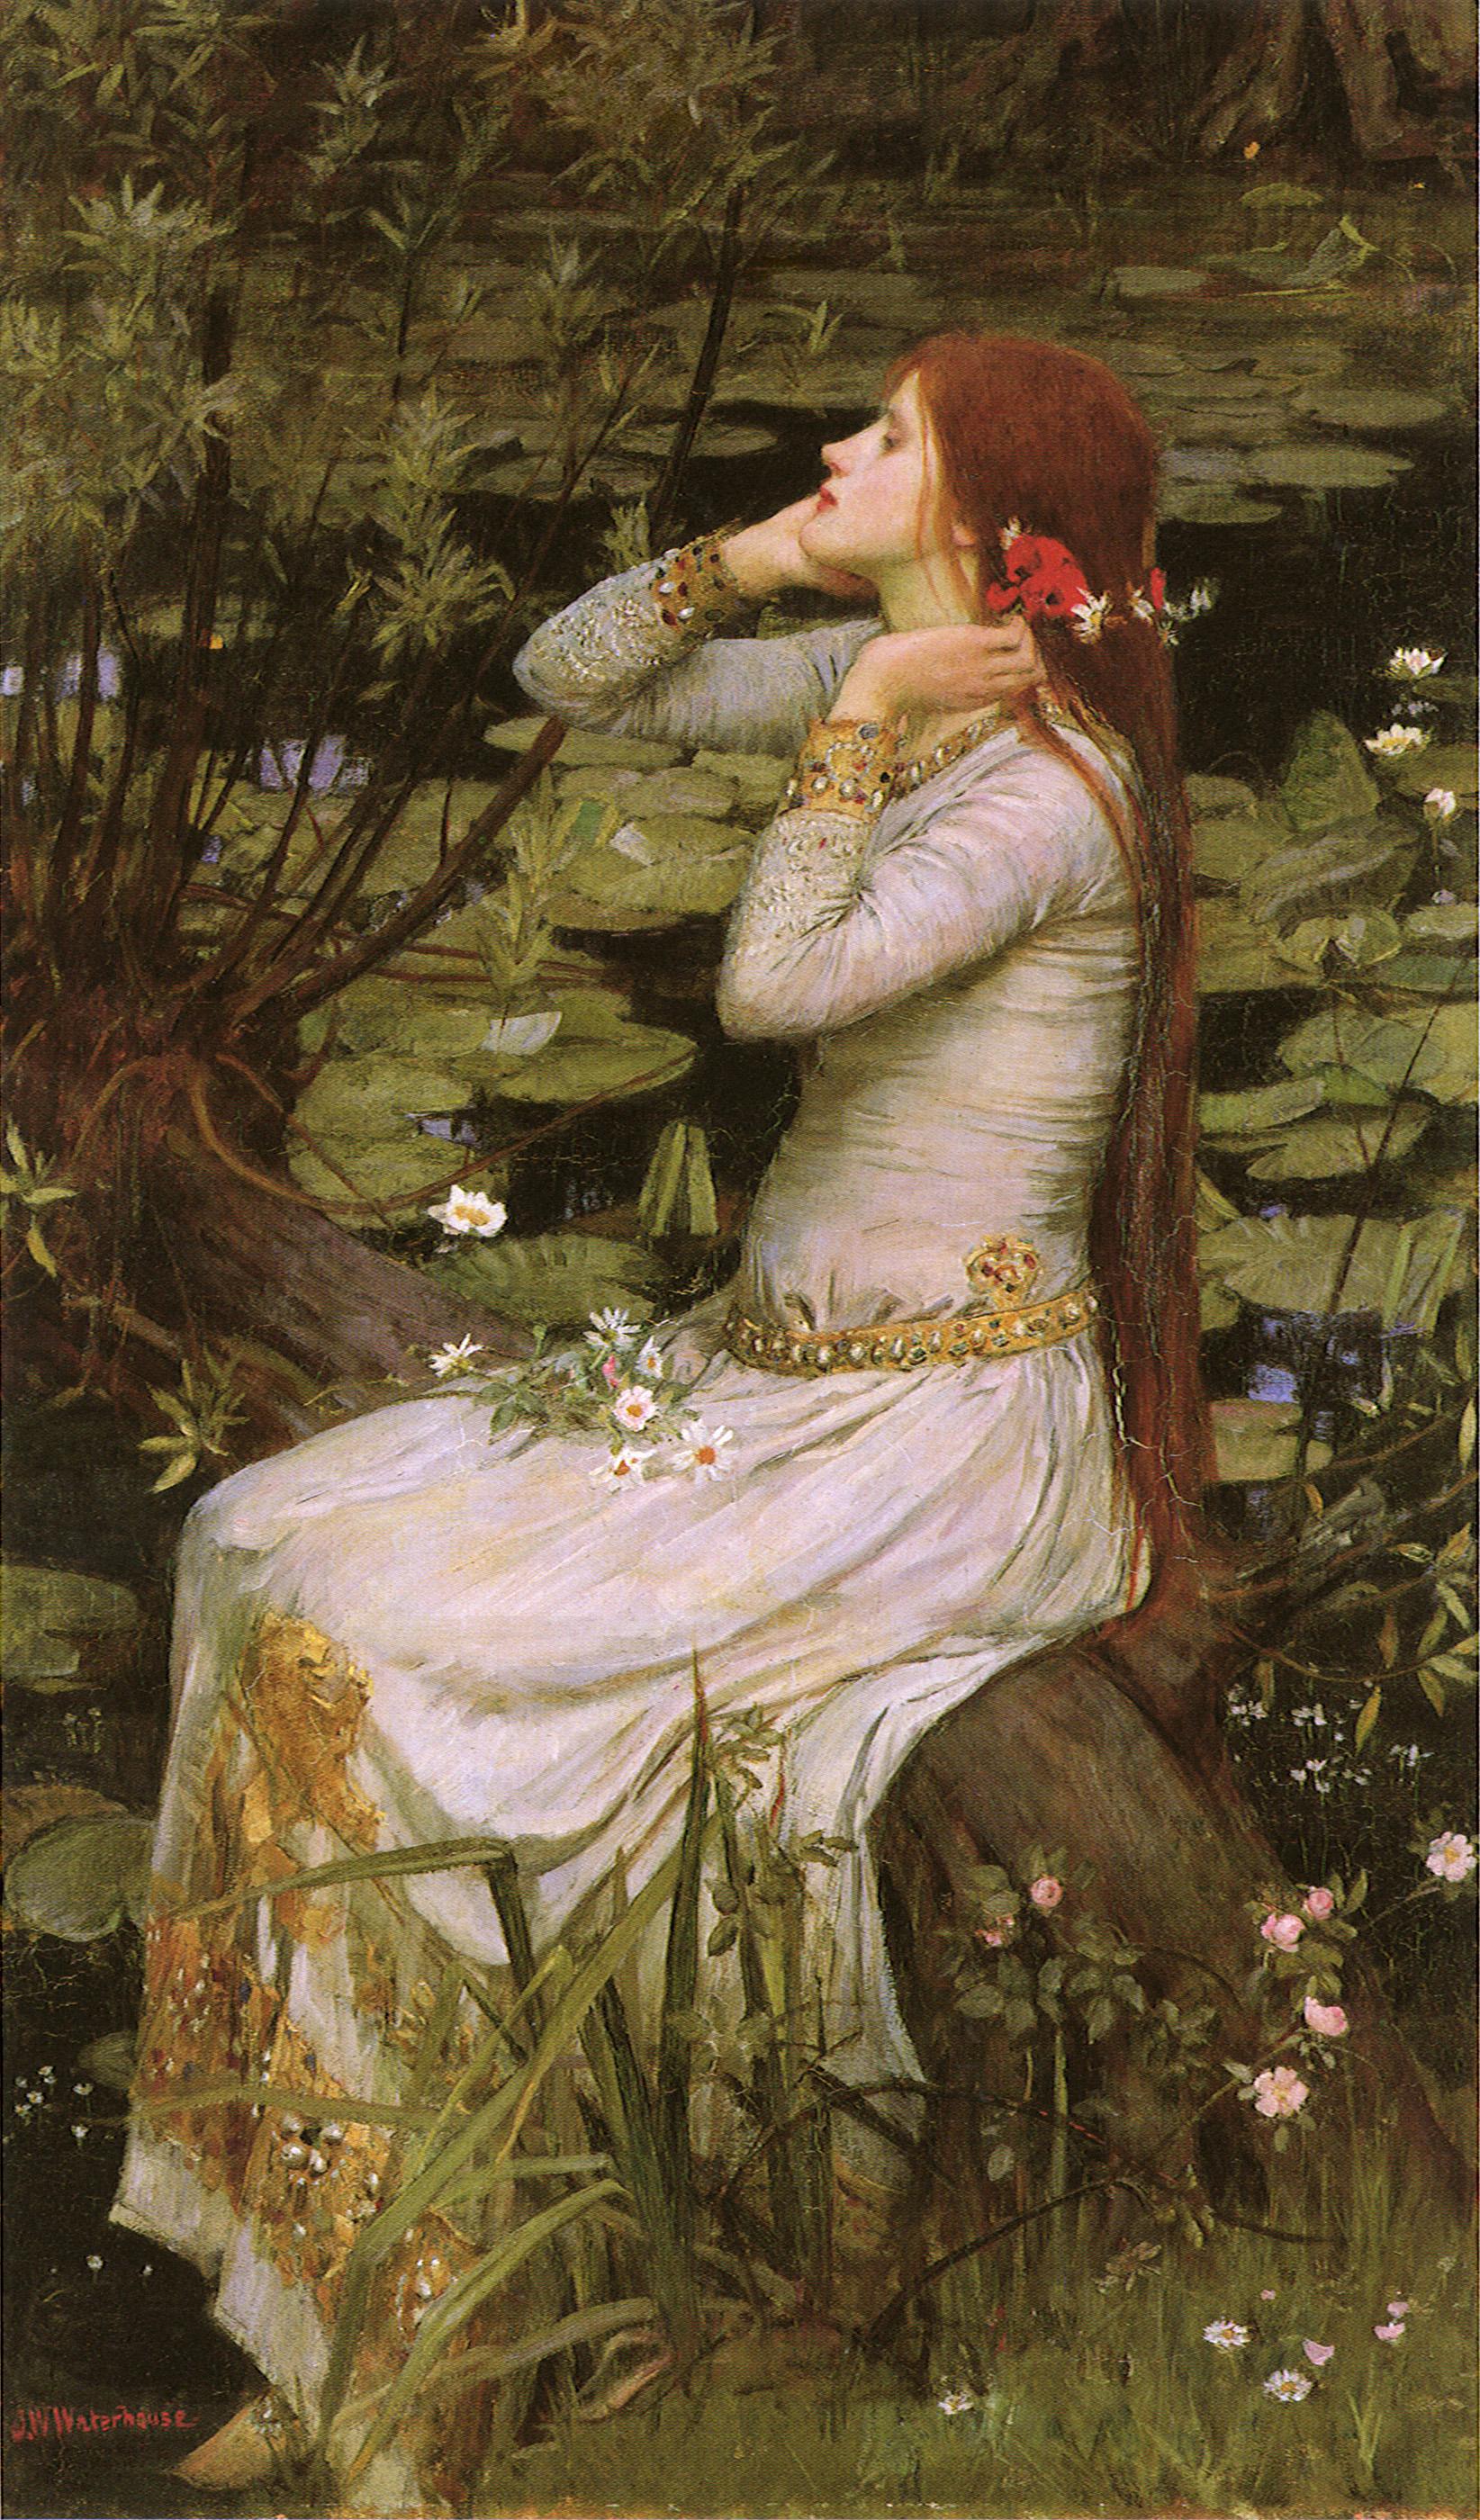 Unbekannt Puzzle 1000 Teile Waterhouse John William The Soul of The Rose